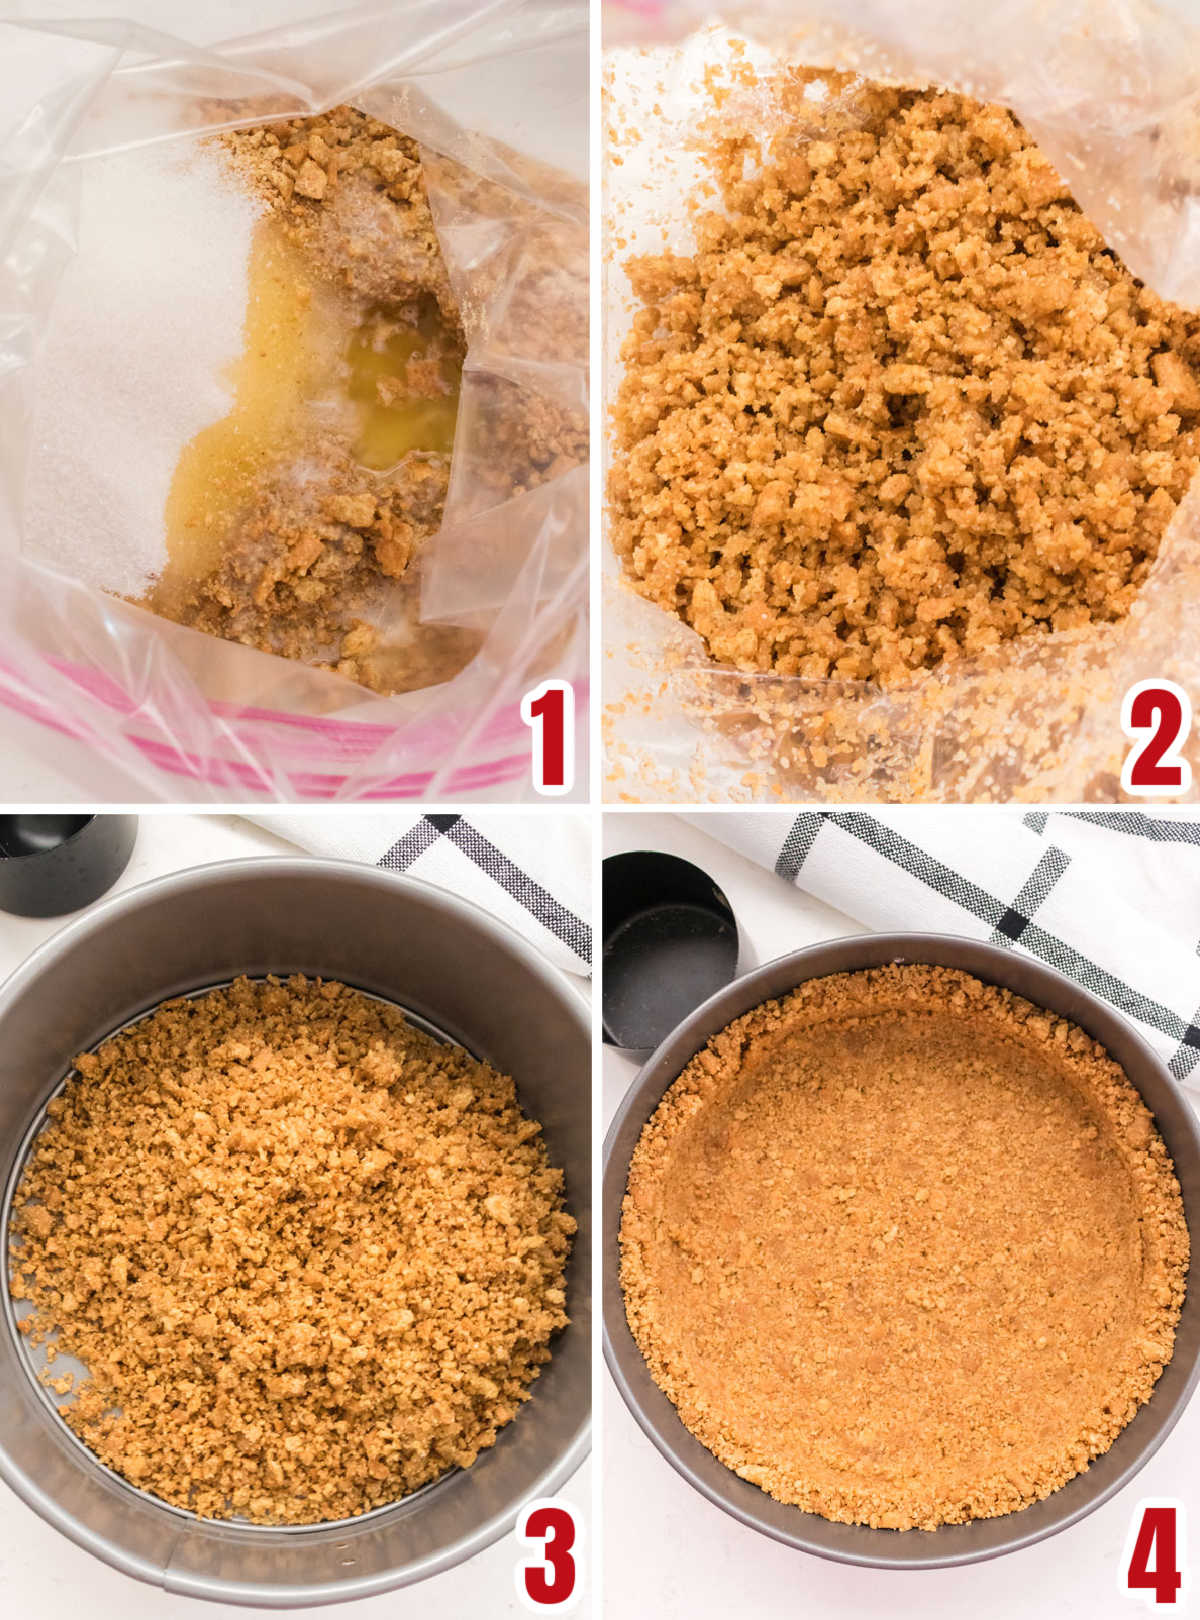 Collage image showing how to make the graham cracker crust for the no bake cheesecake.